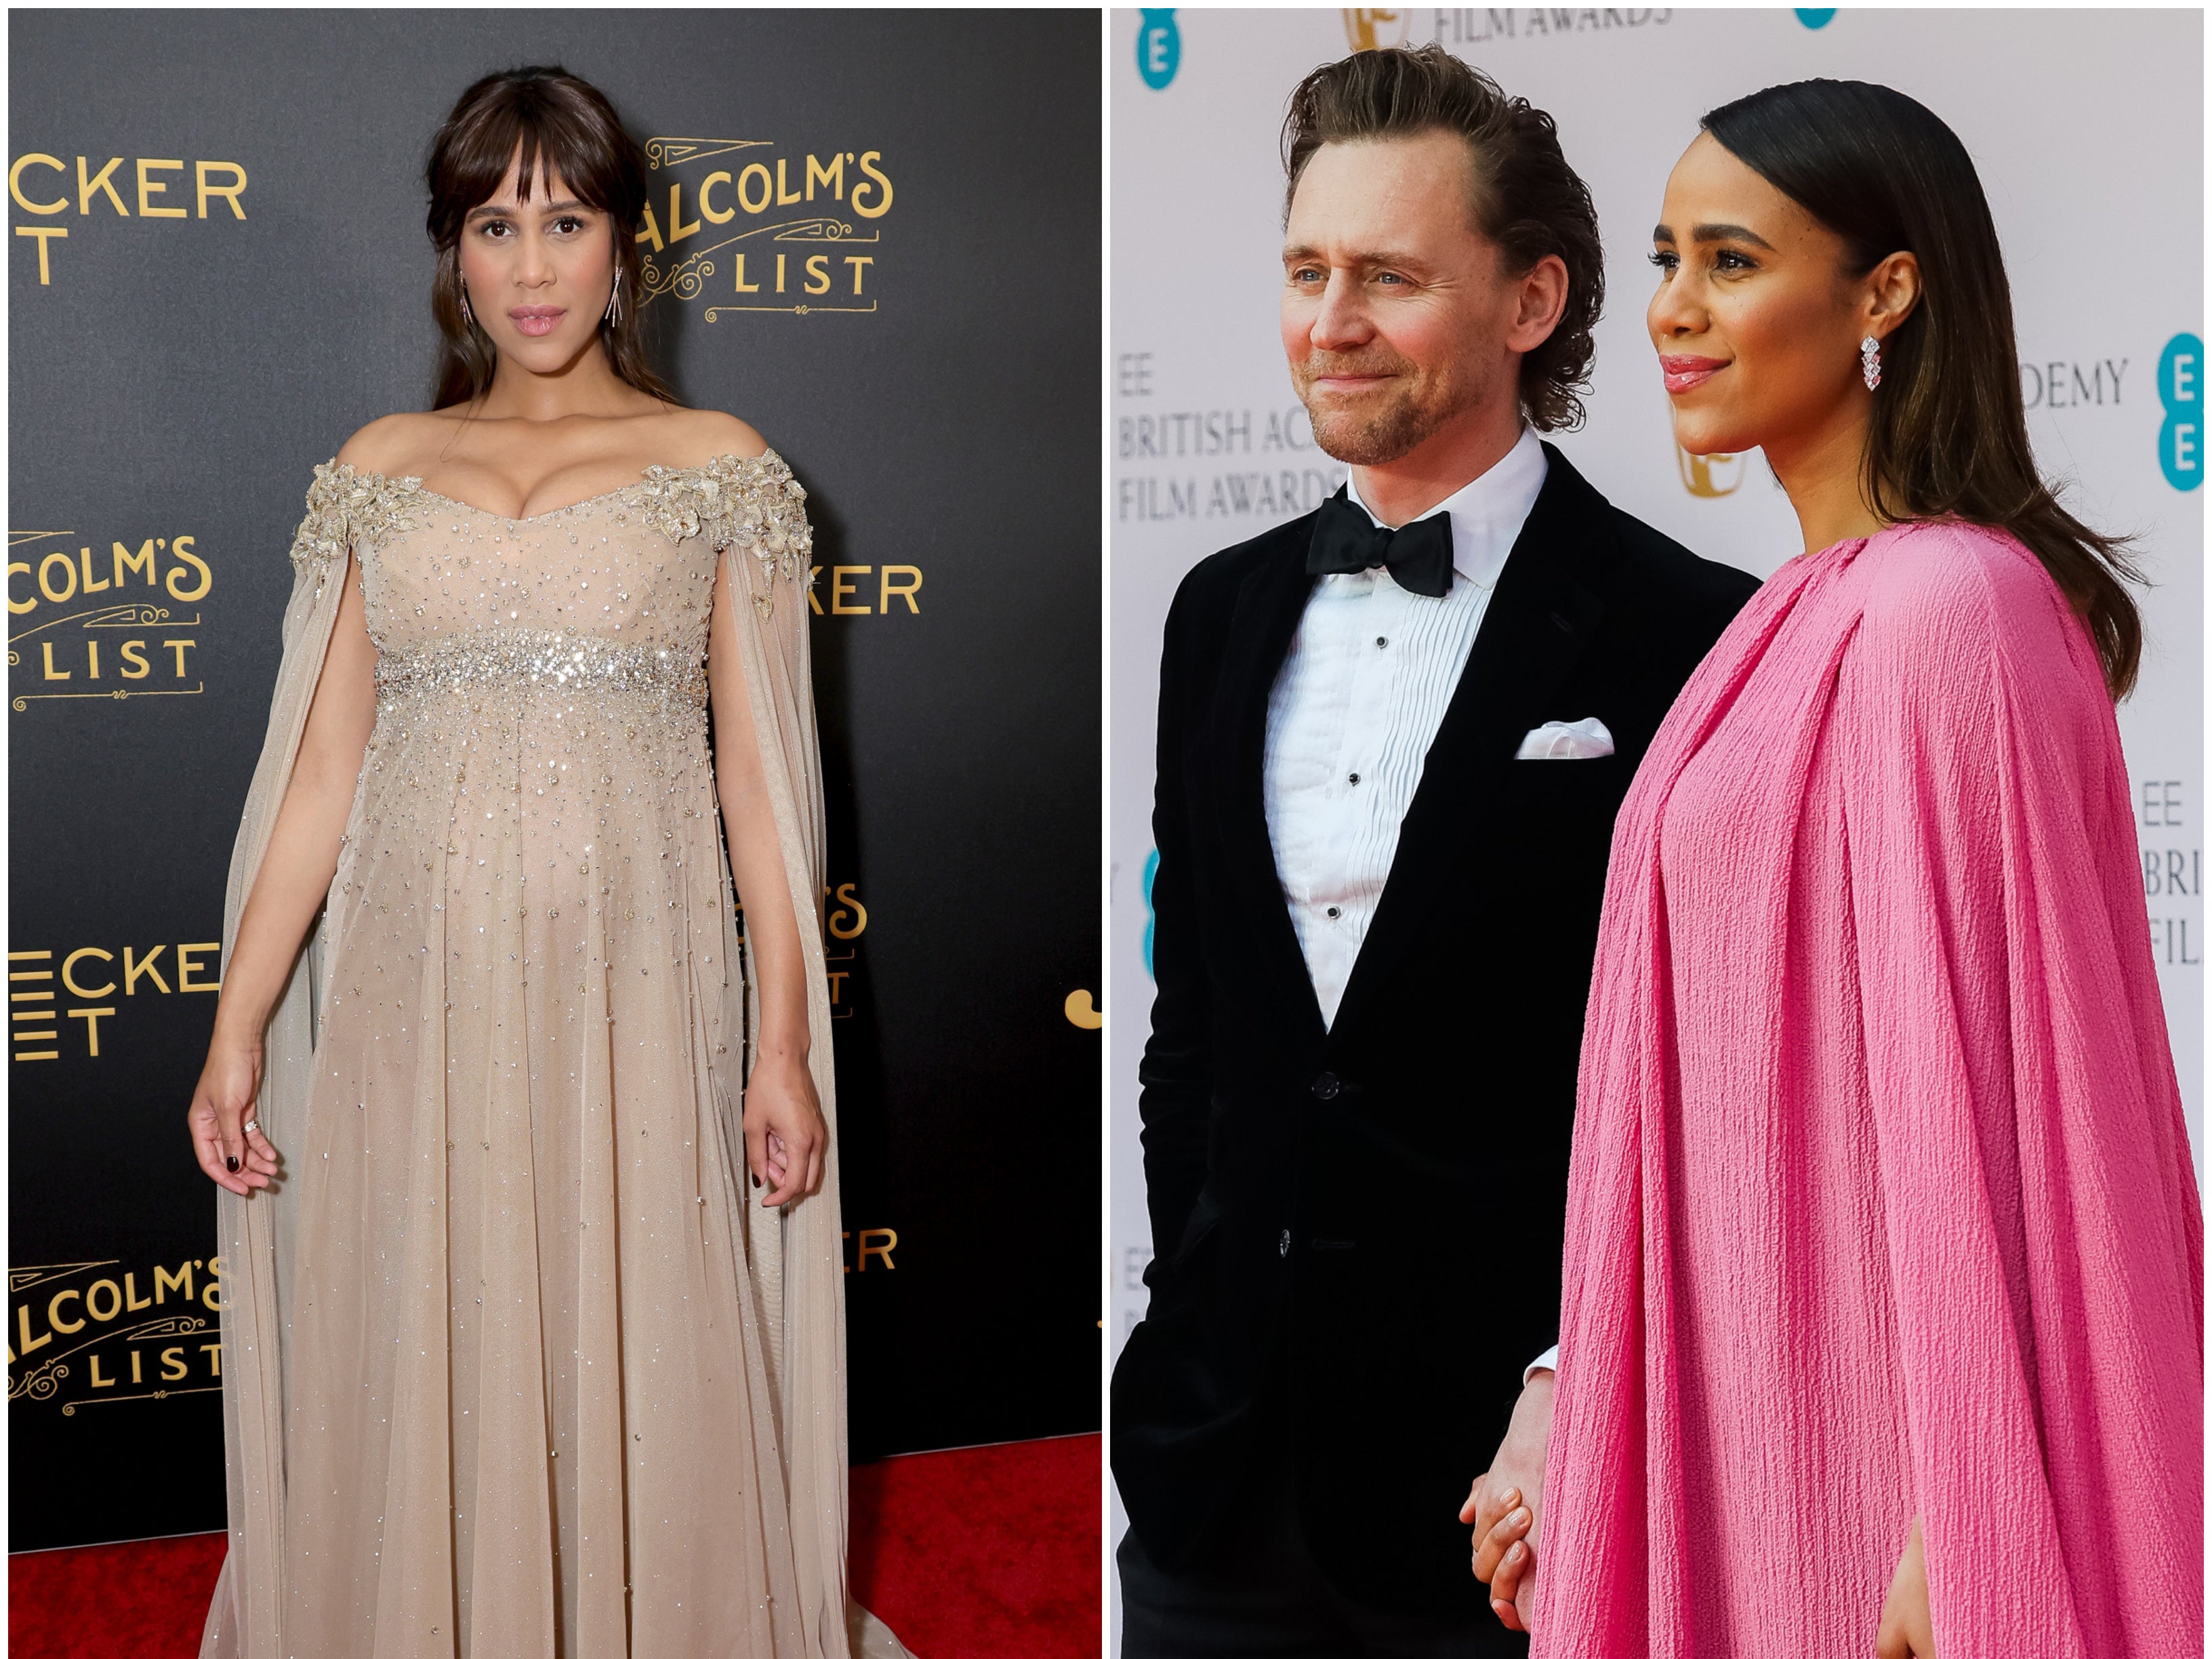 Tom Hiddleston and Zawe Ashton are expecting a baby